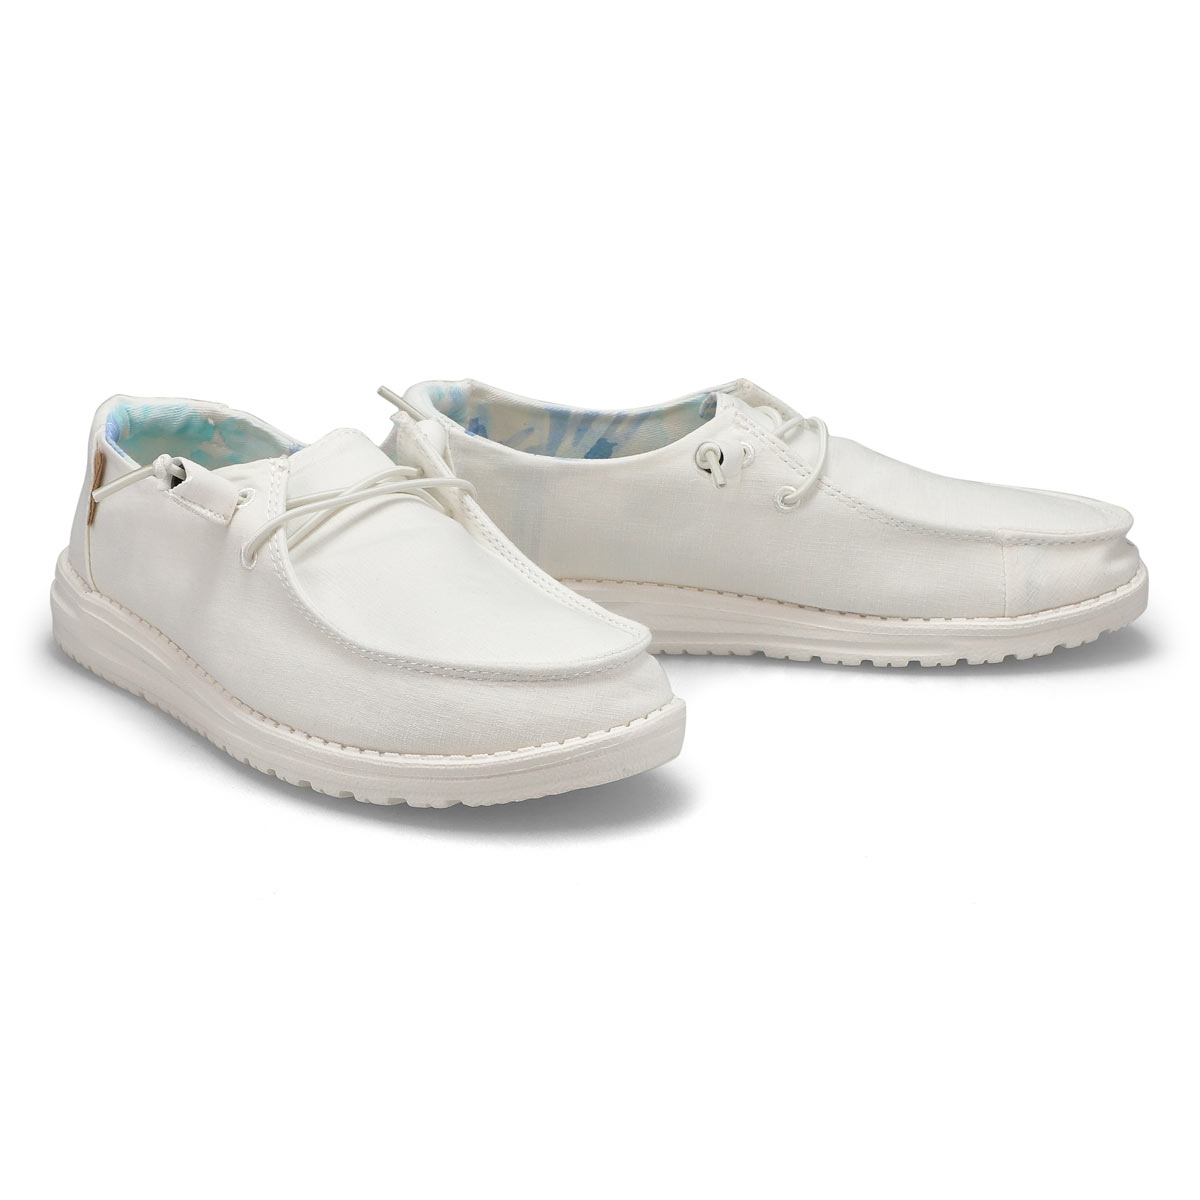 Wendy Chambray Navy White - Women's Casual Shoes